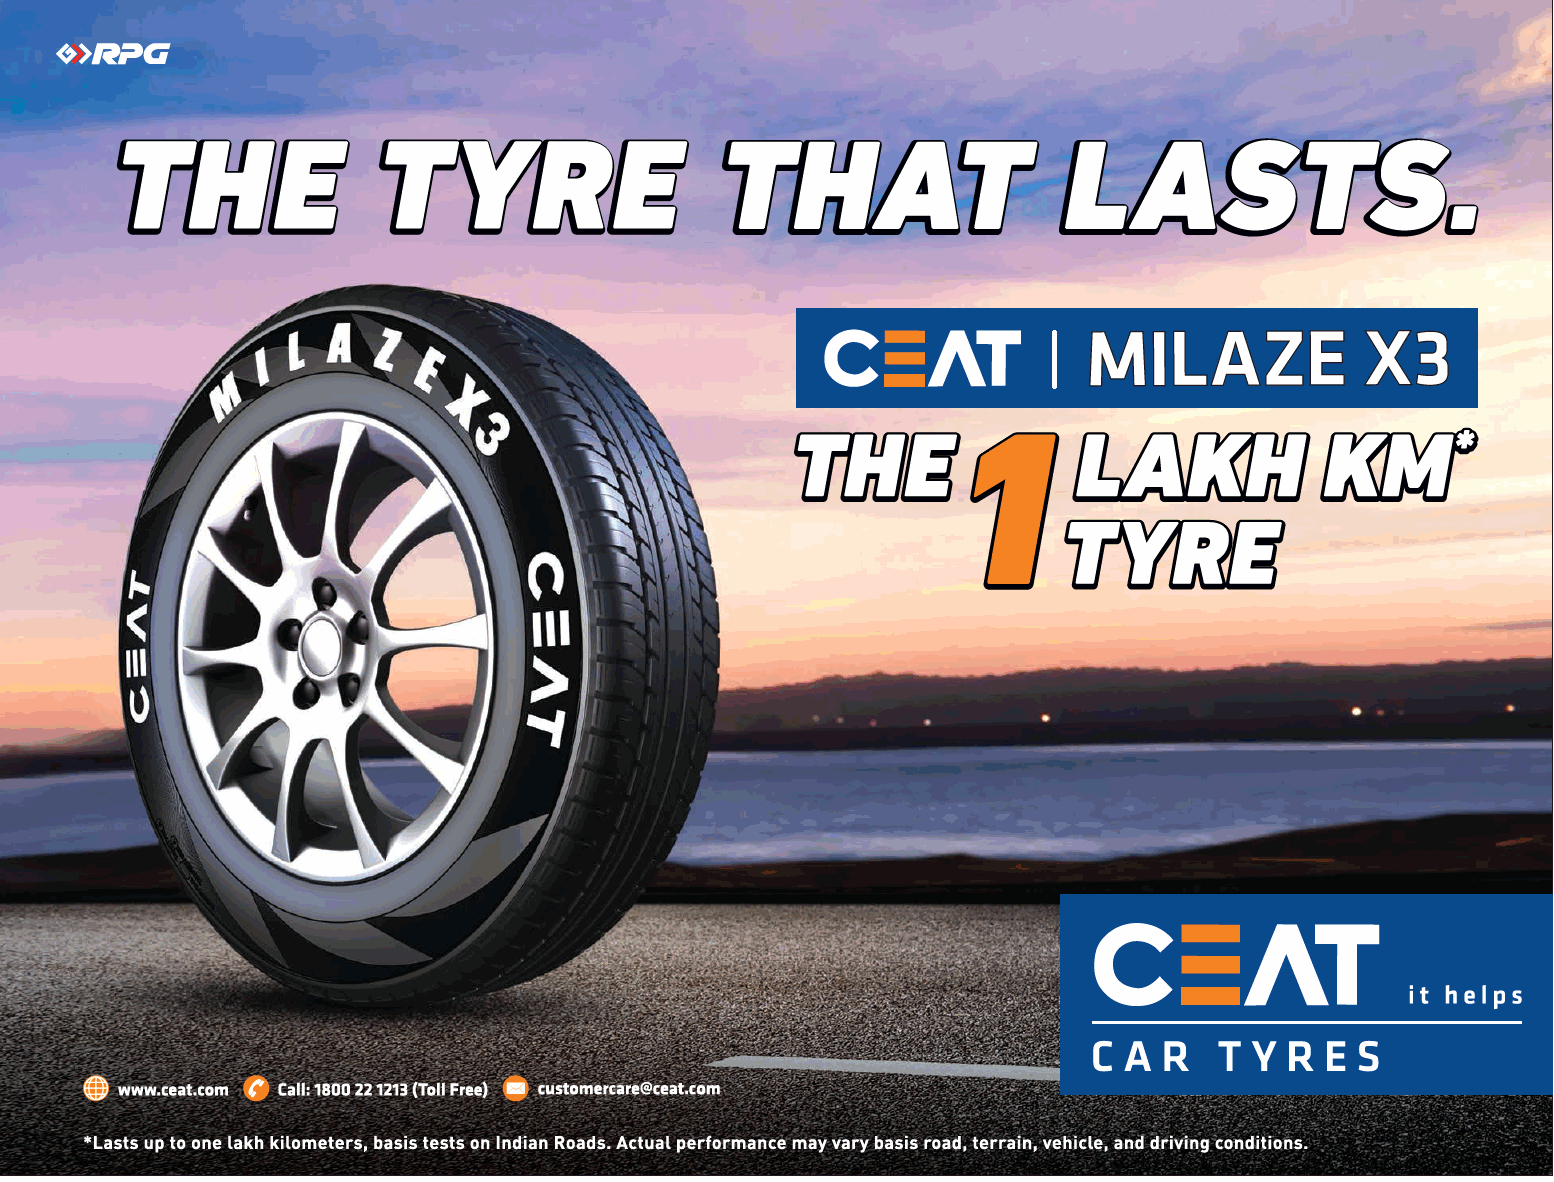 ceat-car-tyres-the-tyre-that-lasts-the-1-tyre-lakh-km-tyre-ad-advert-gallery